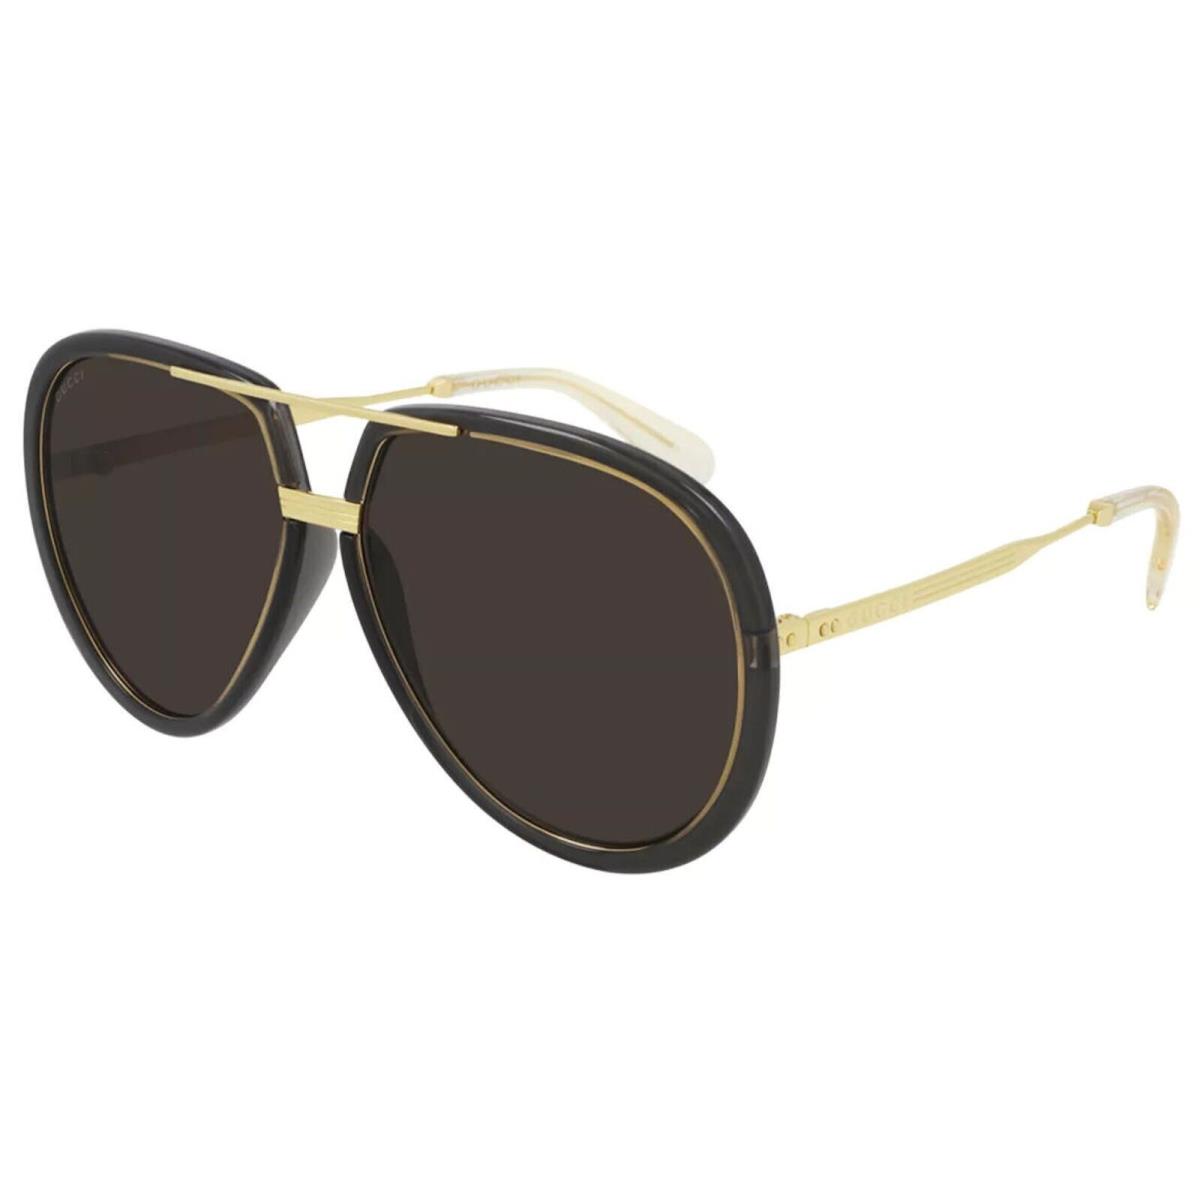 Gucci GG0904S-001 Gray Gold Frame / Brown Lens Sunglasses